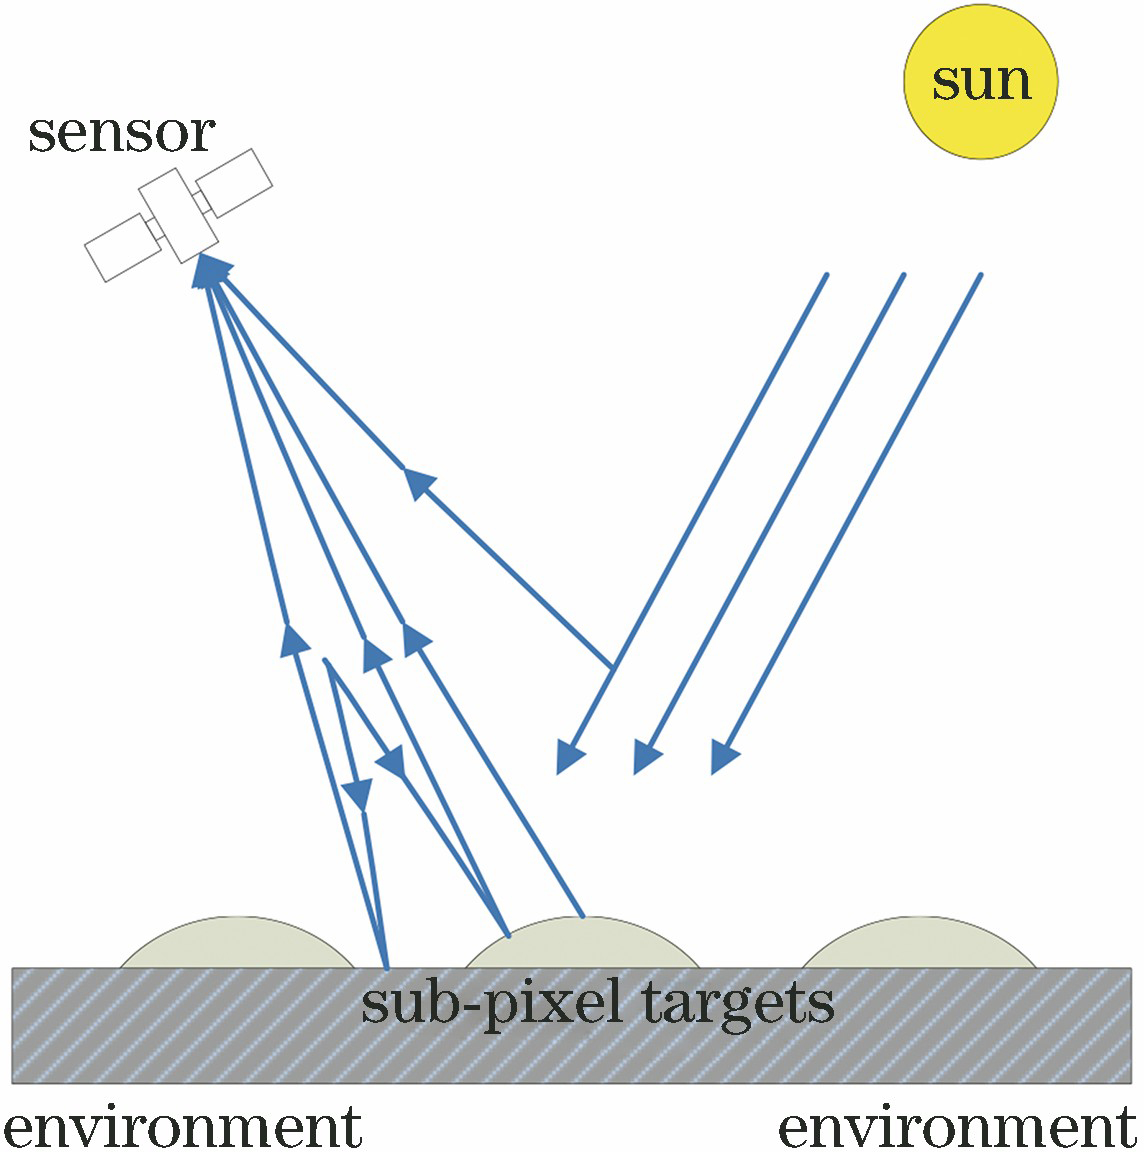 Diagram of solar radiation and interaction of atmosphere and sub-pixel targets